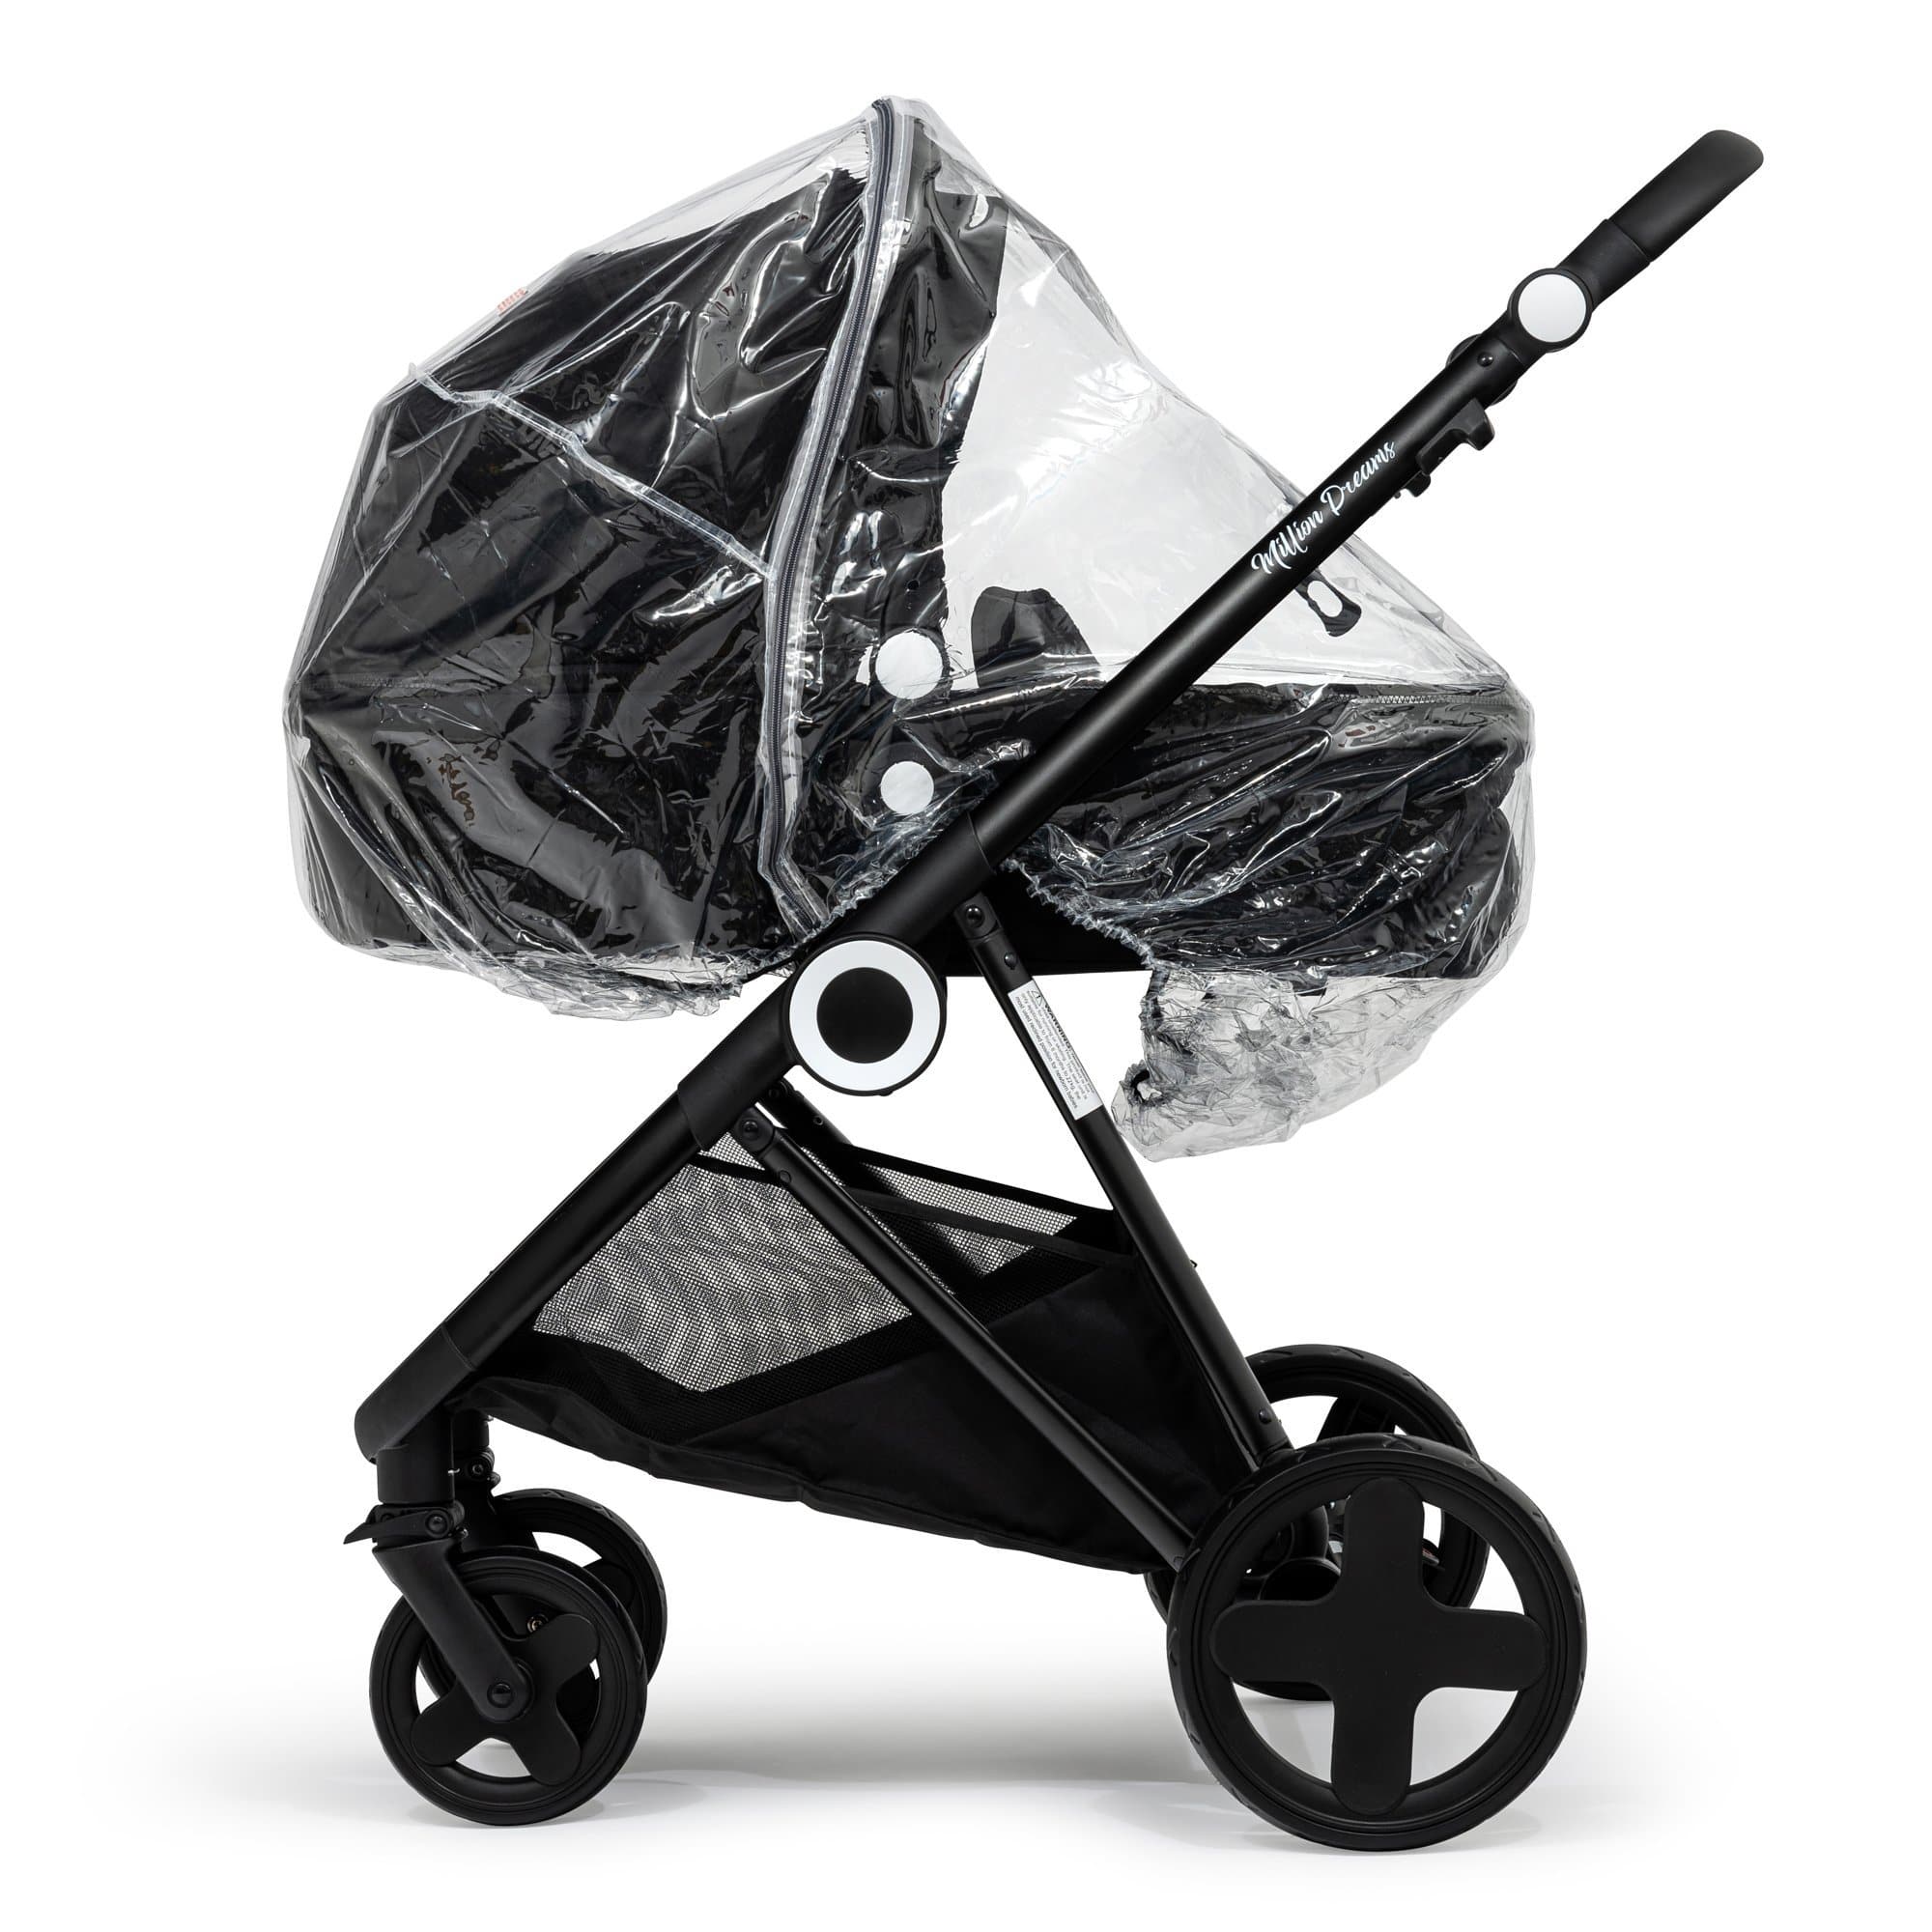 2 in 1 Rain Cover Compatible with Mima - Fits All Models - For Your Little One